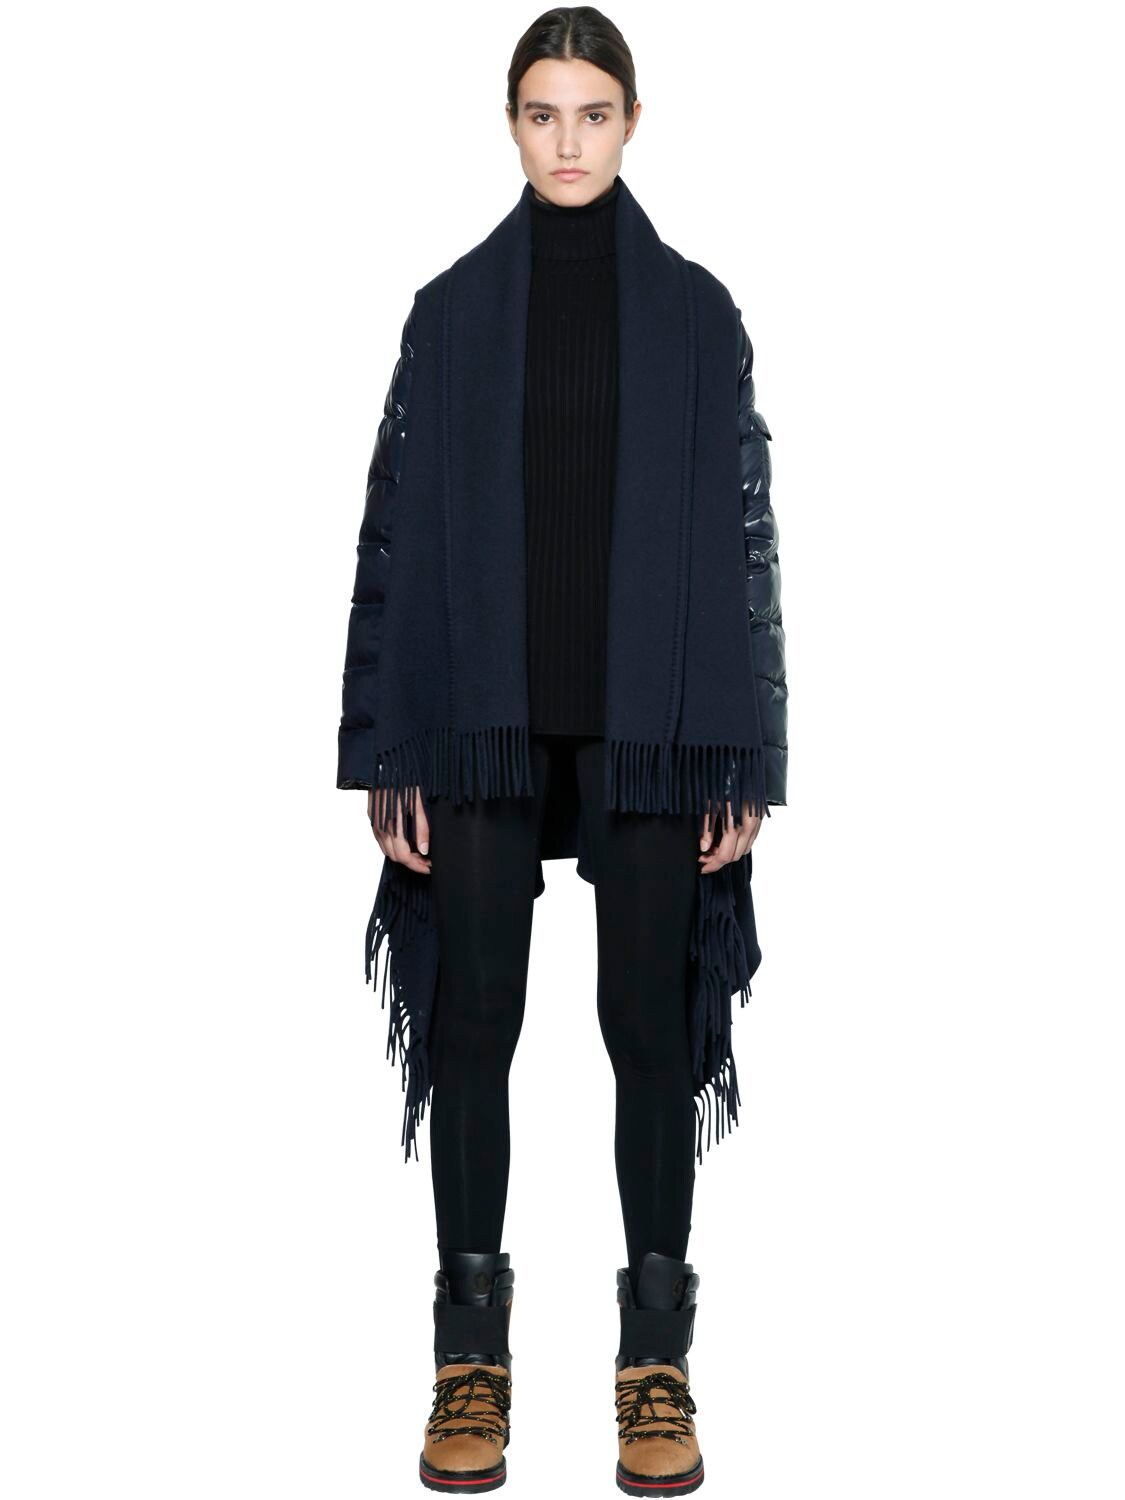 Moncler Wool Cape W/ Laqué Nylon Down Sleeves In Midnight